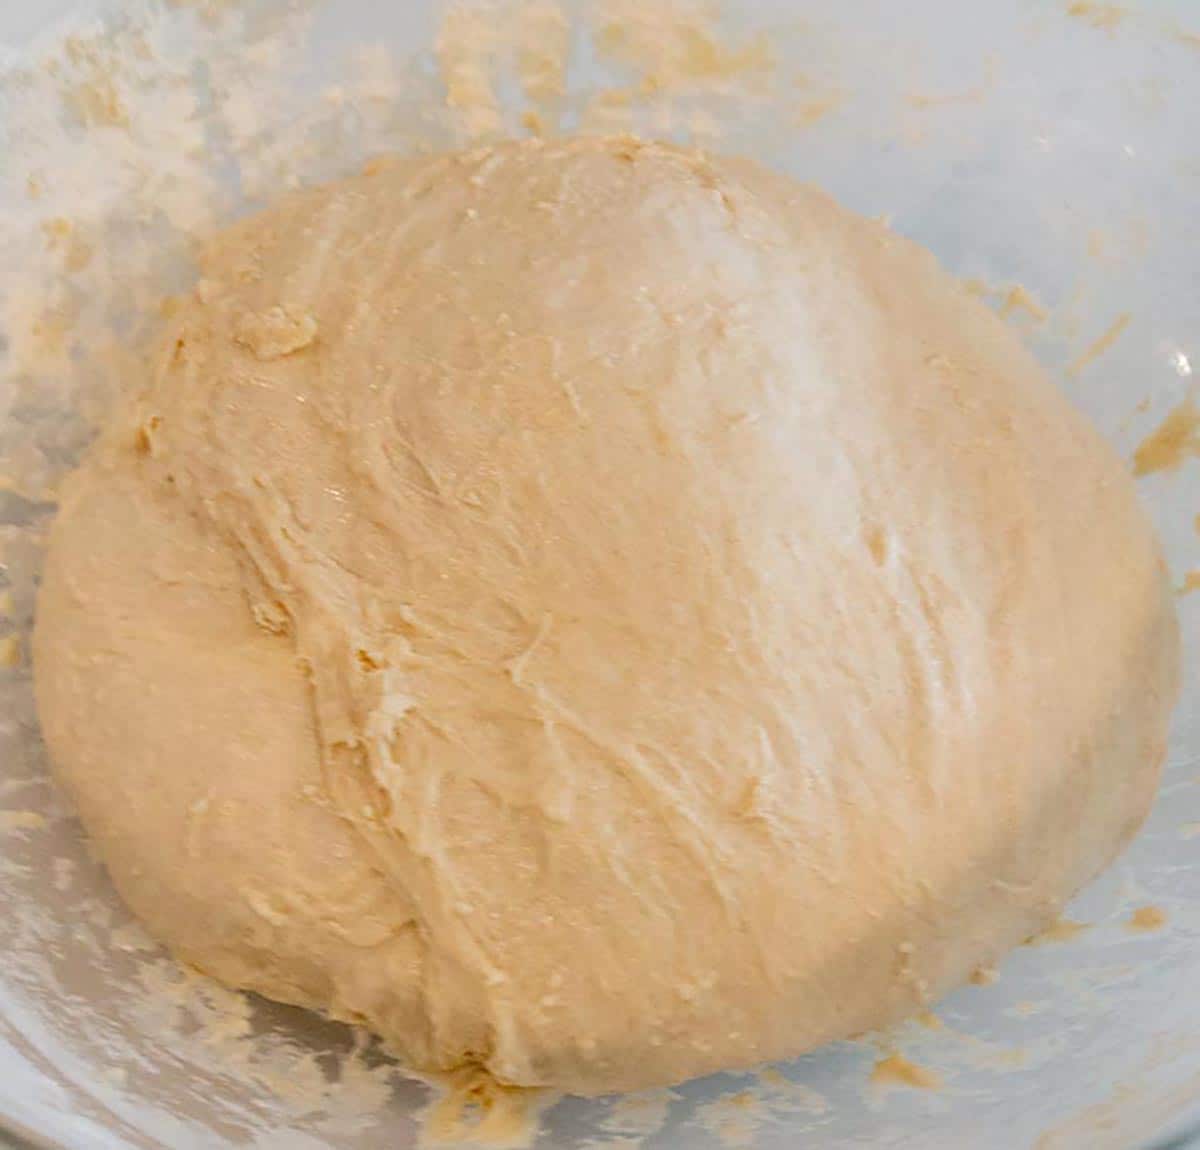 A ball of sourdough during the stretch and fold process.